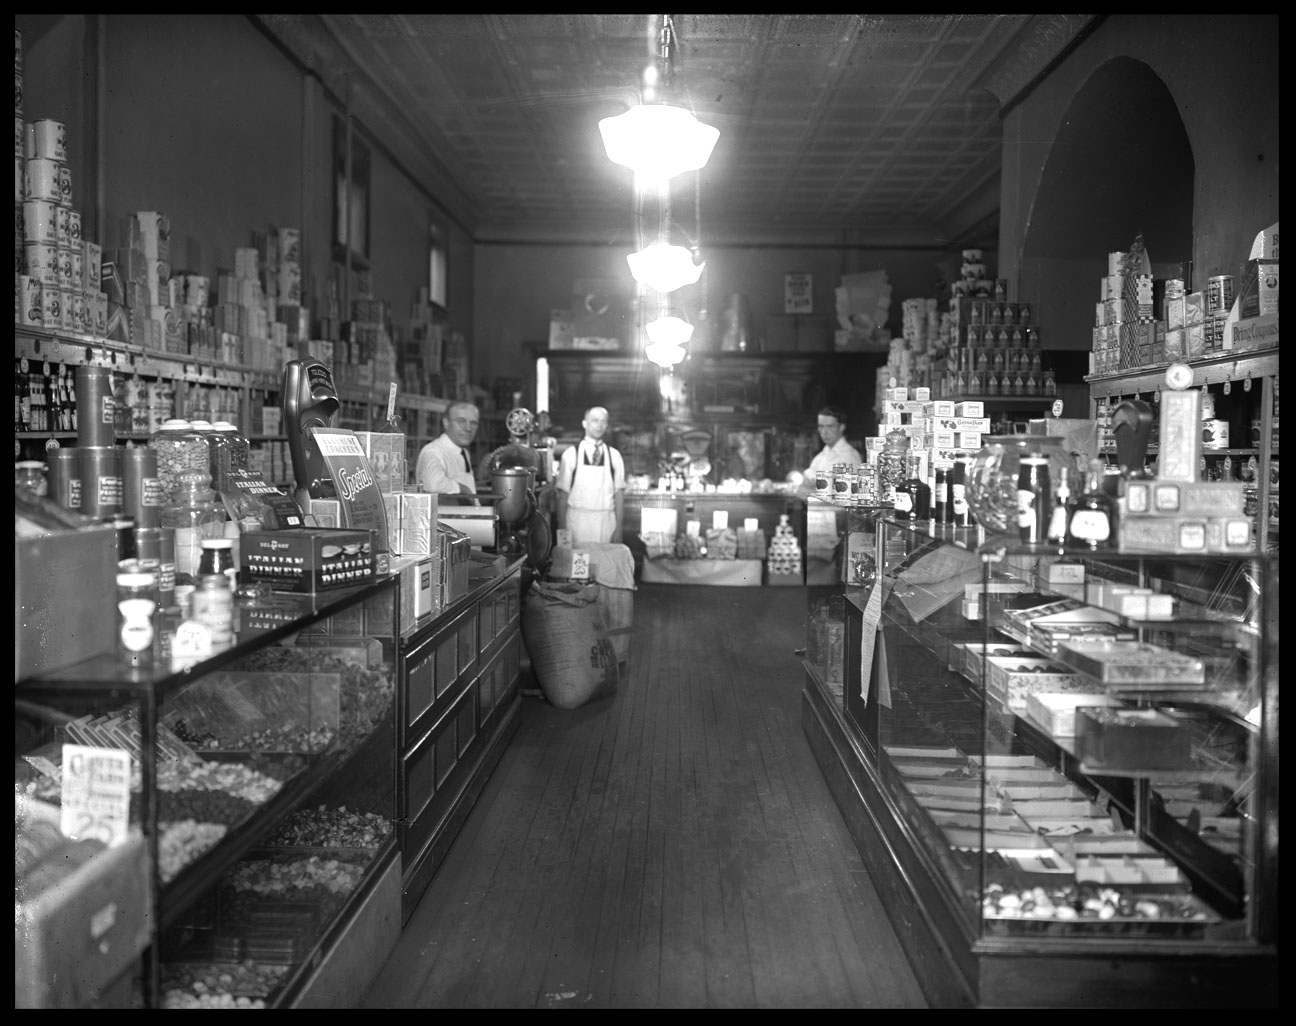 Dry Goods Store c.1920 from original 5x7 glass plate negative